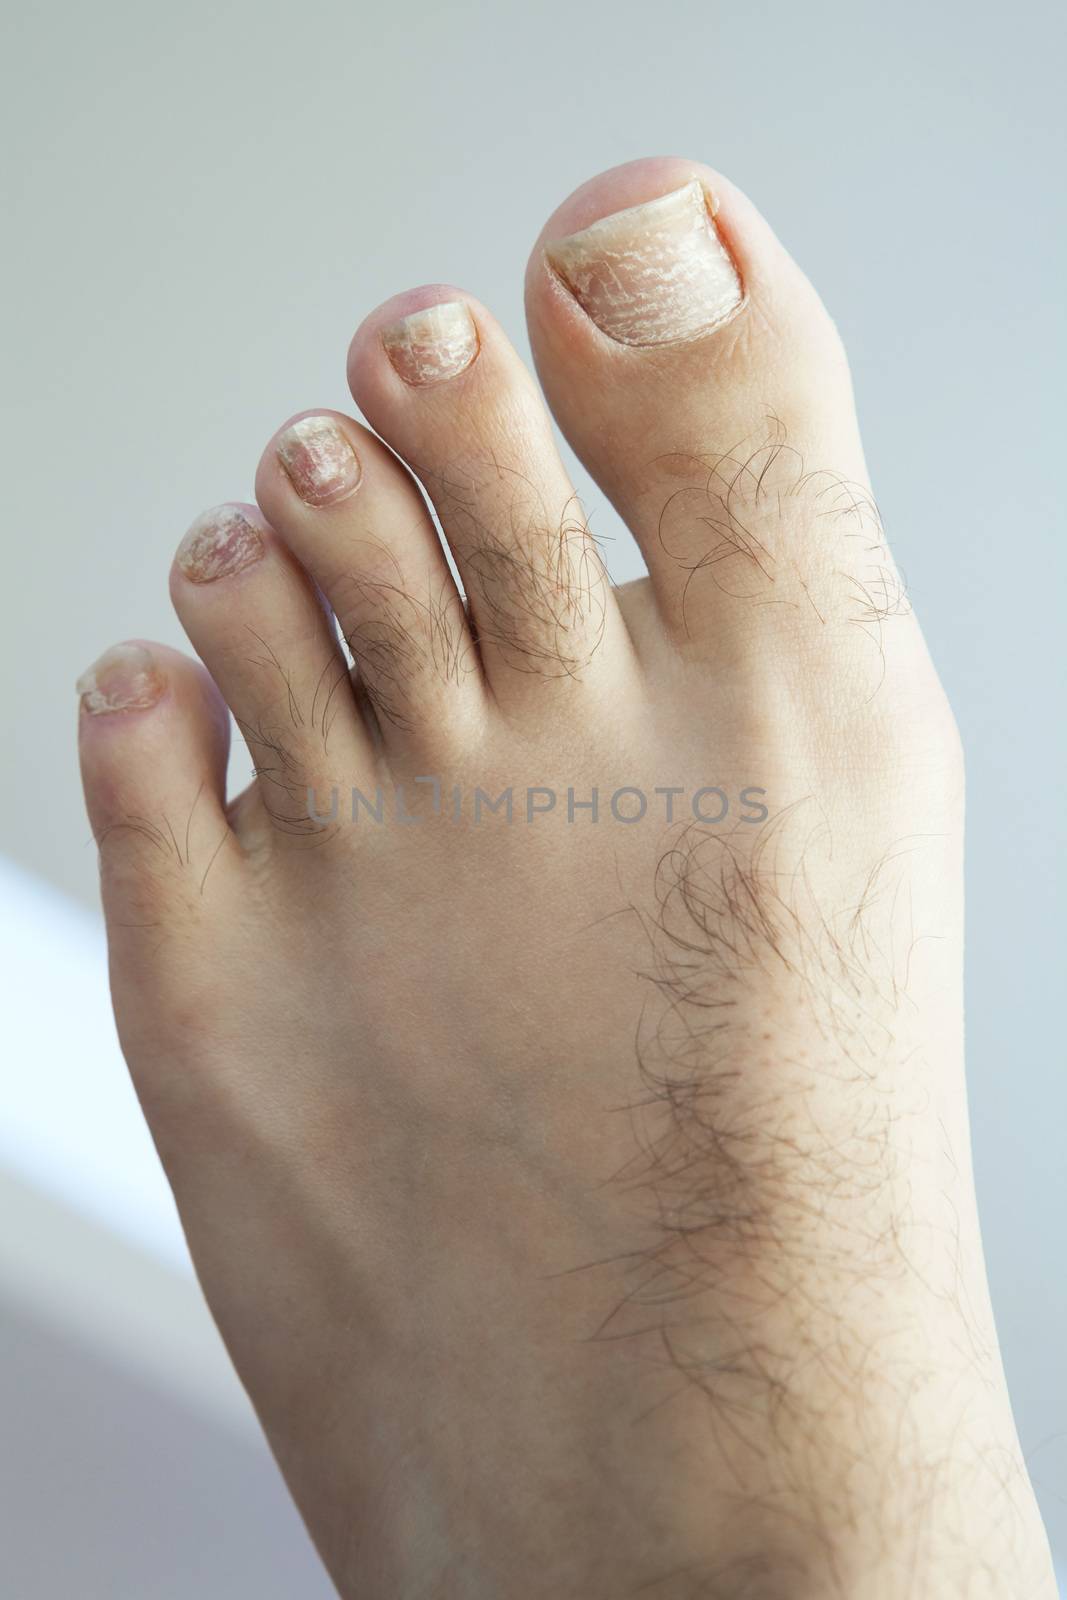 Closeup of a human foot and toes with cracked and peeling toe nails.